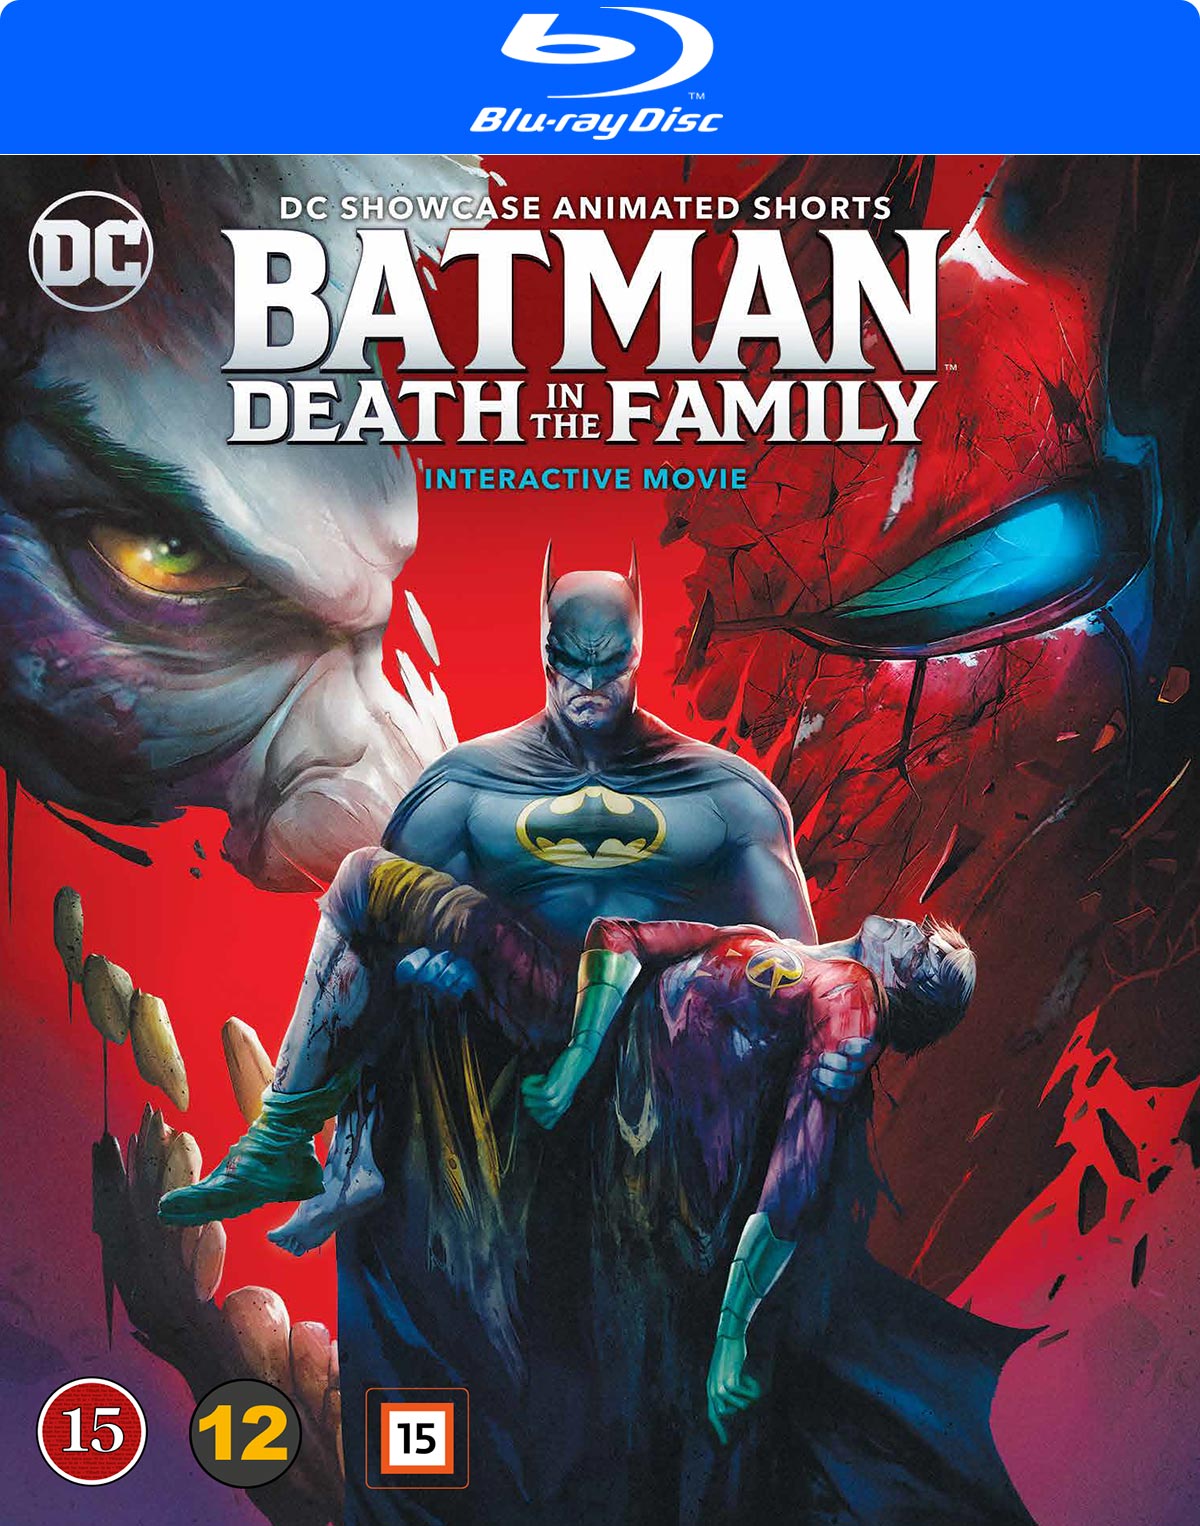 Death in the Family 2020. Batman death in the family